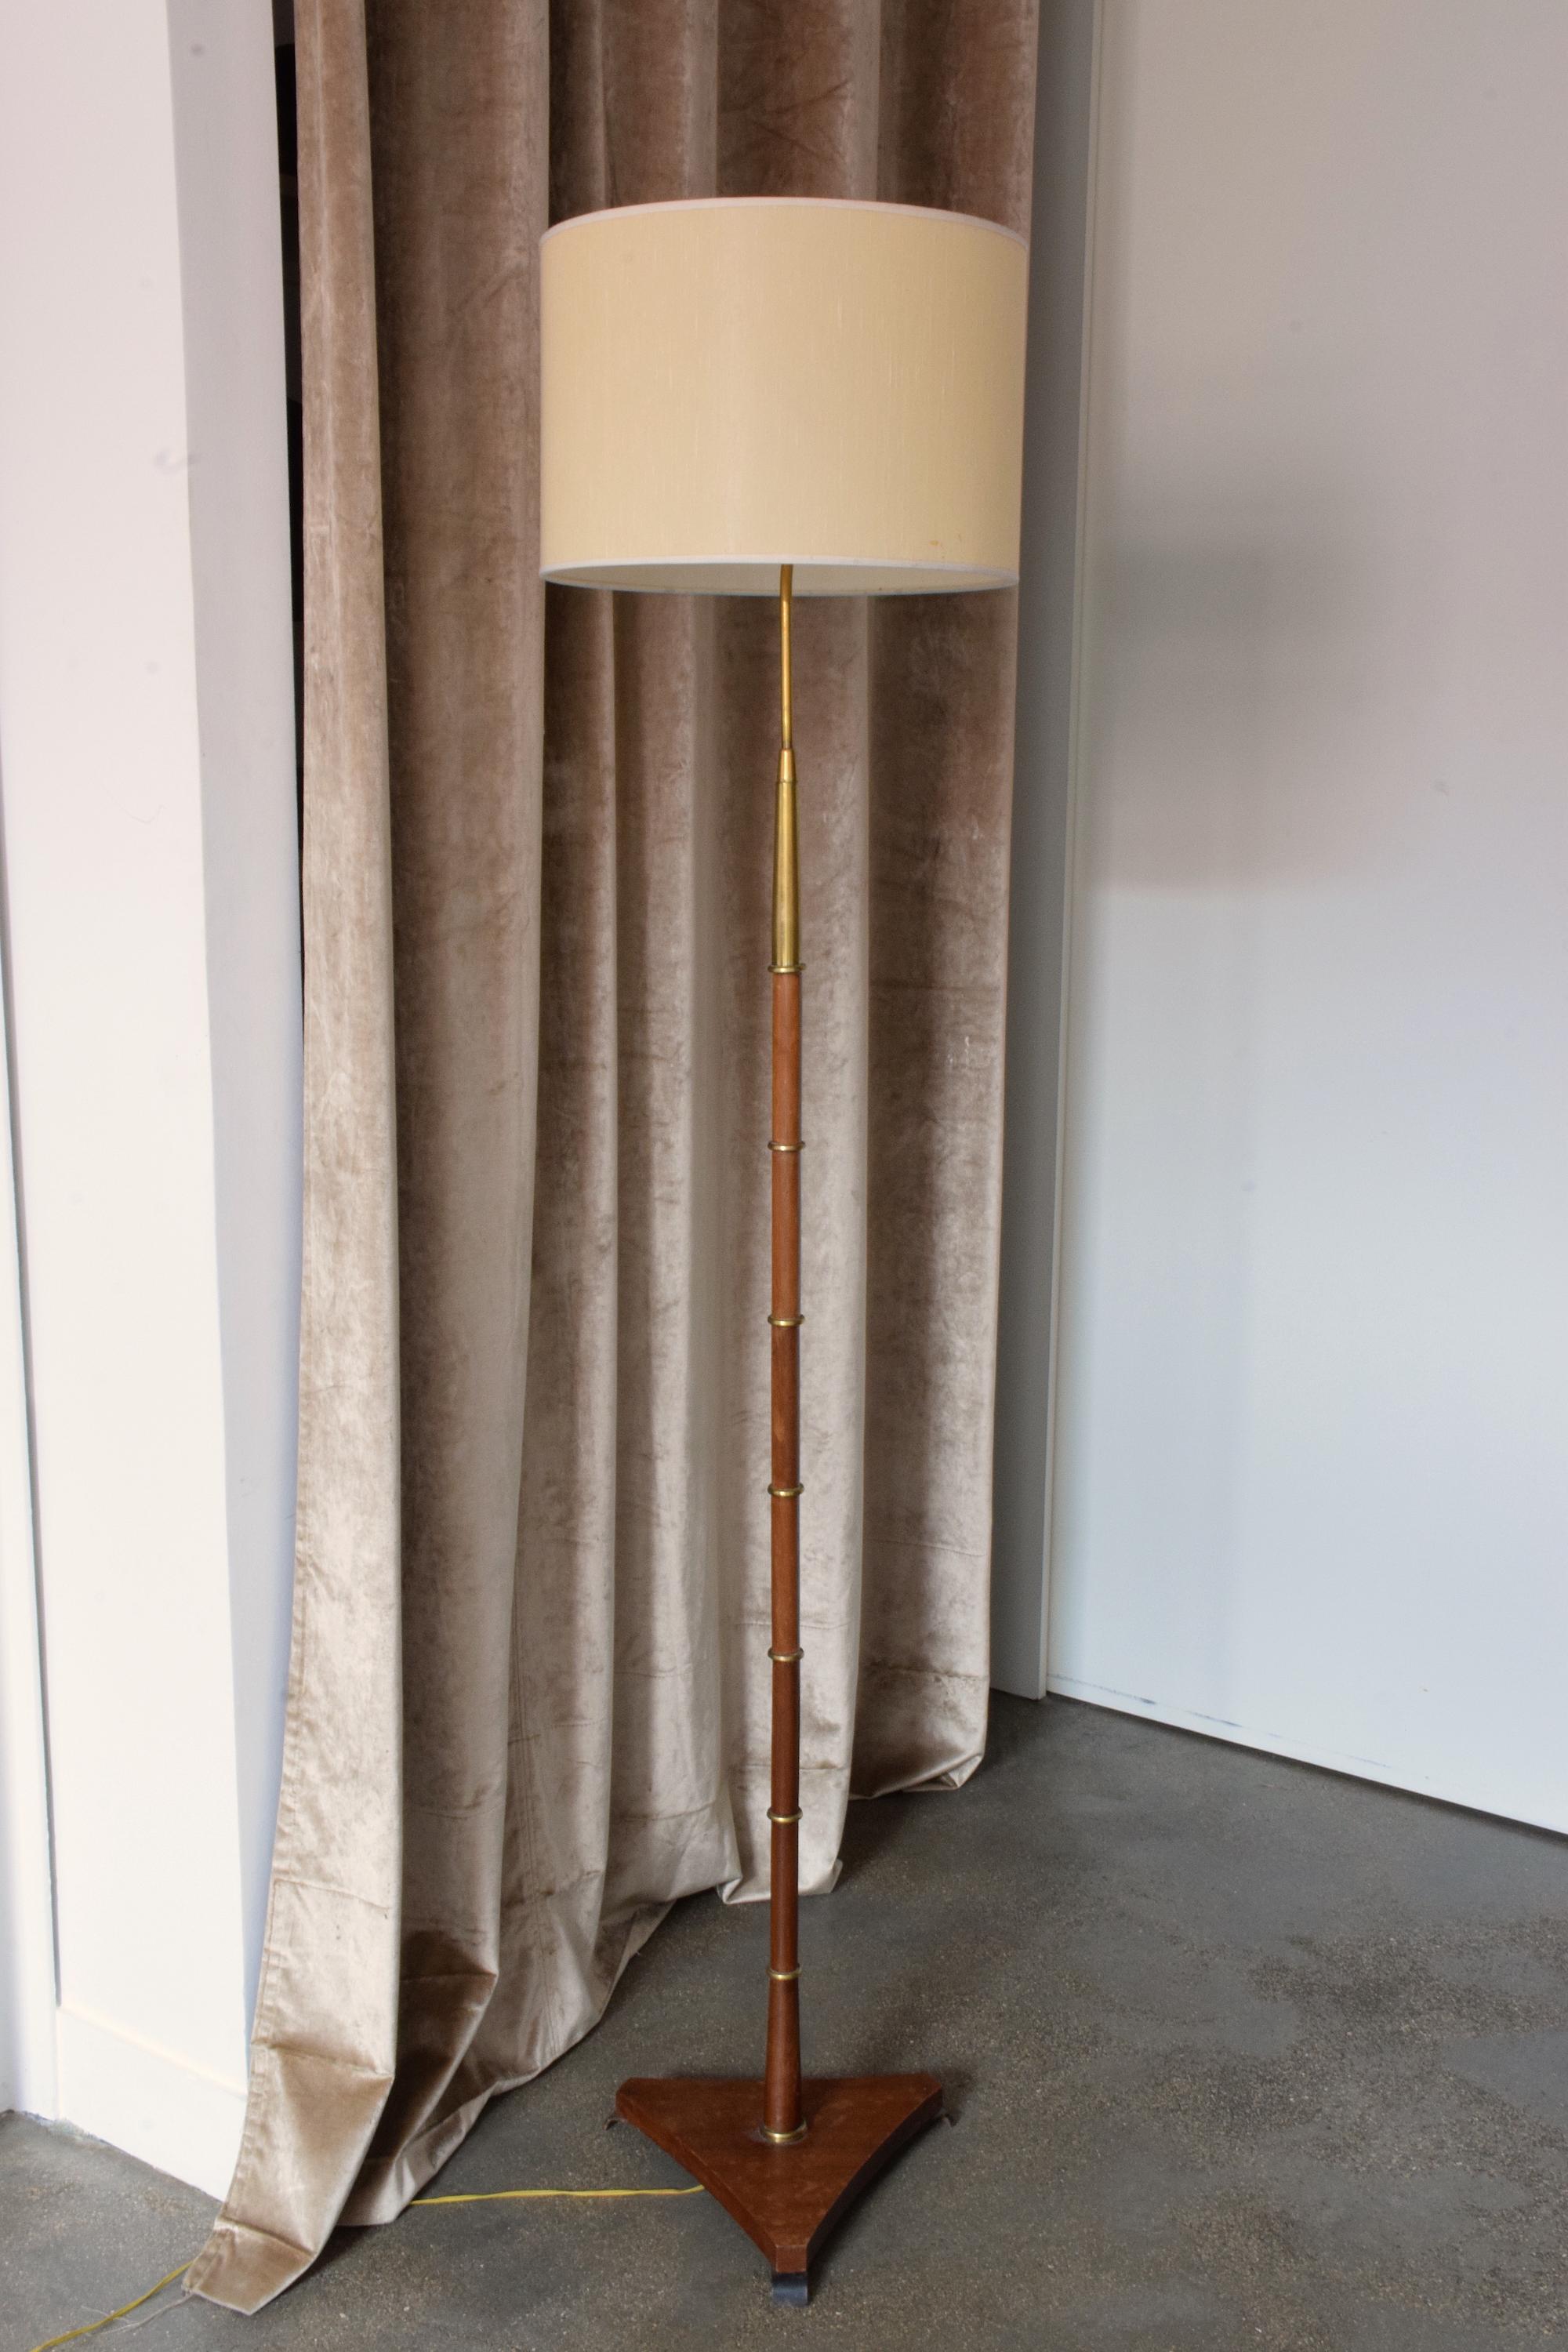 A 20th century French elegant floor lamp by Maison Lunel in its beautiful original condition designed in a solid wooden structure with delicate brass rings on the stem and a solid gold polished brass top. The triangular base sits on steel legs and